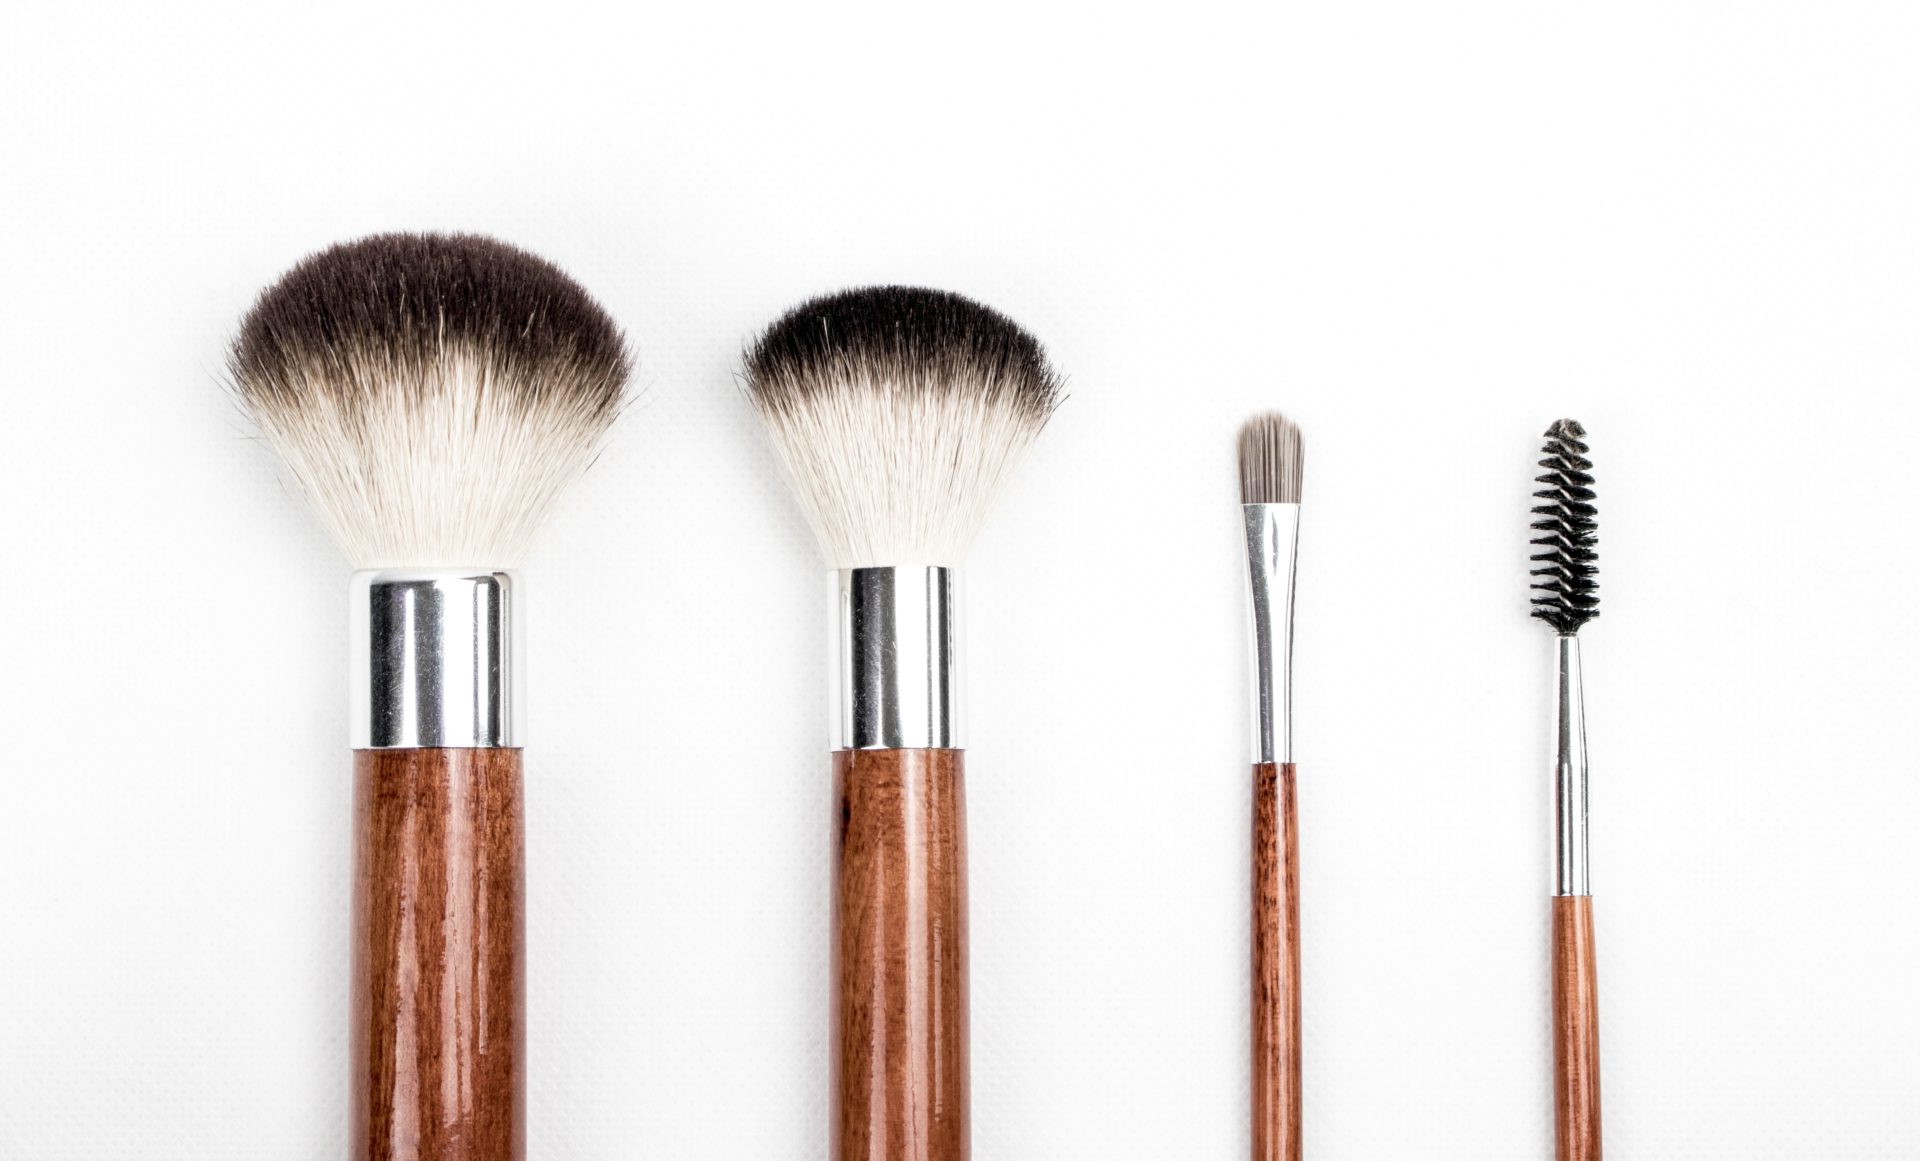 Different kinds of makeup brushes